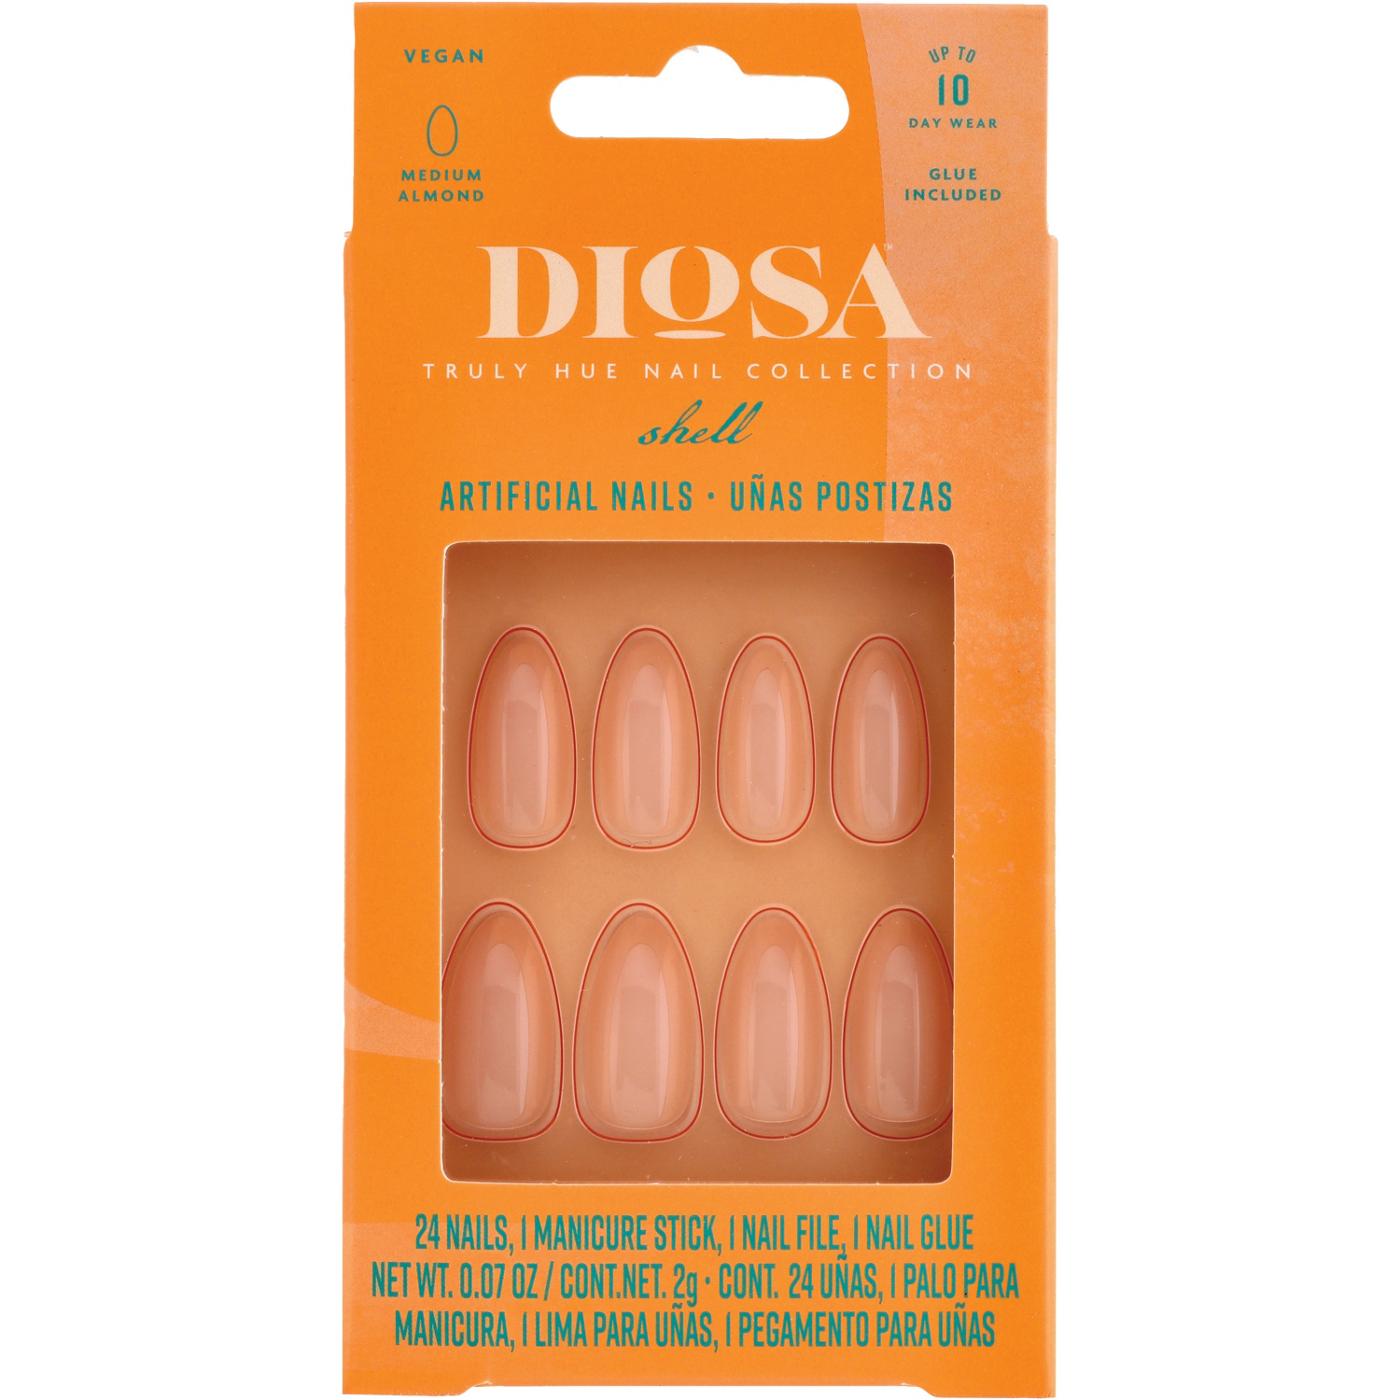 Diosa Medium Almond Artificial Nails – Truly Hue Shell; image 1 of 7